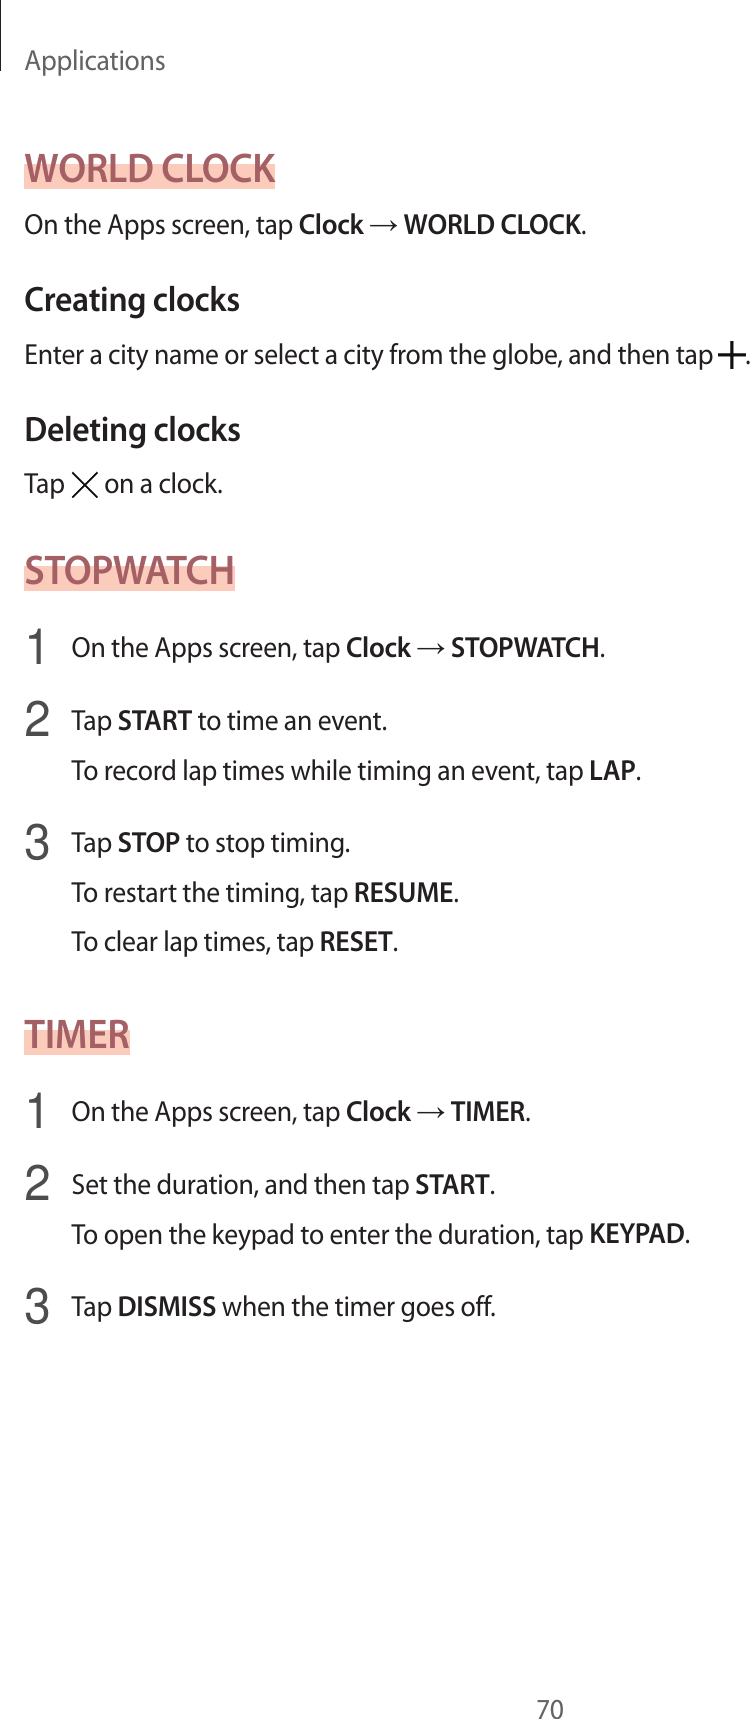 Applications70WORLD CLOCKOn the Apps screen, tap Clock → WORLD CLOCK.Creating clocksEnter a city name or select a city from the globe, and then tap  .Deleting clocksTap   on a clock.STOPWATCH1  On the Apps screen, tap Clock → STOPWATCH.2  Tap START to time an event.To record lap times while timing an event, tap LAP.3  Tap STOP to stop timing.To restart the timing, tap RESUME.To clear lap times, tap RESET.TIMER1  On the Apps screen, tap Clock → TIMER.2  Set the duration, and then tap START.To open the keypad to enter the duration, tap KEYPAD.3  Tap DISMISS when the timer goes off.